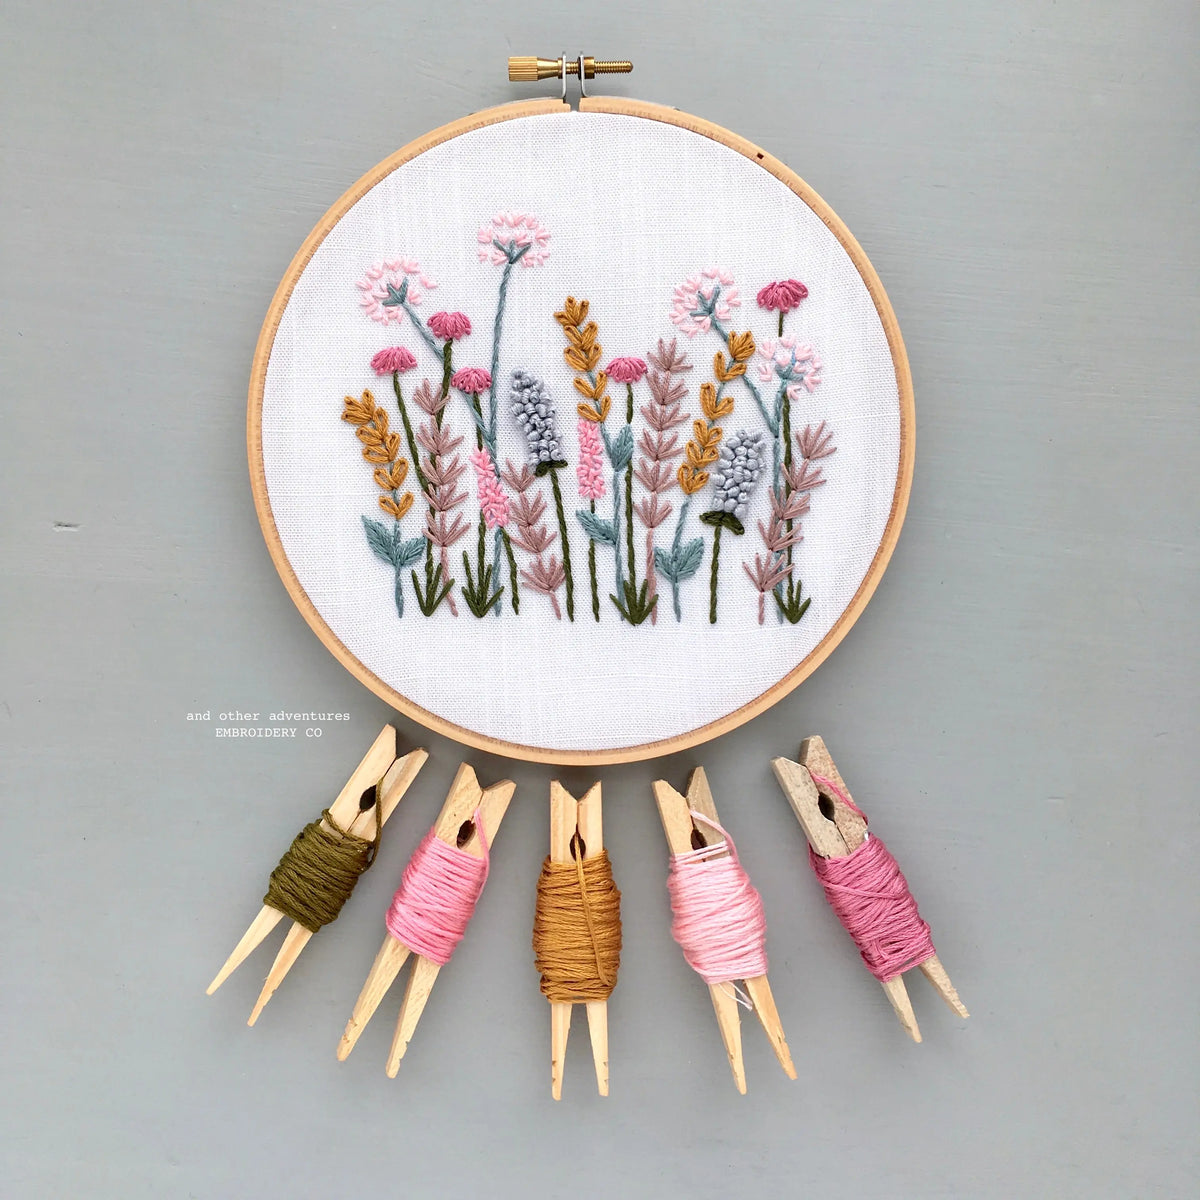 Hand Embroidery Kit - Evermore Red